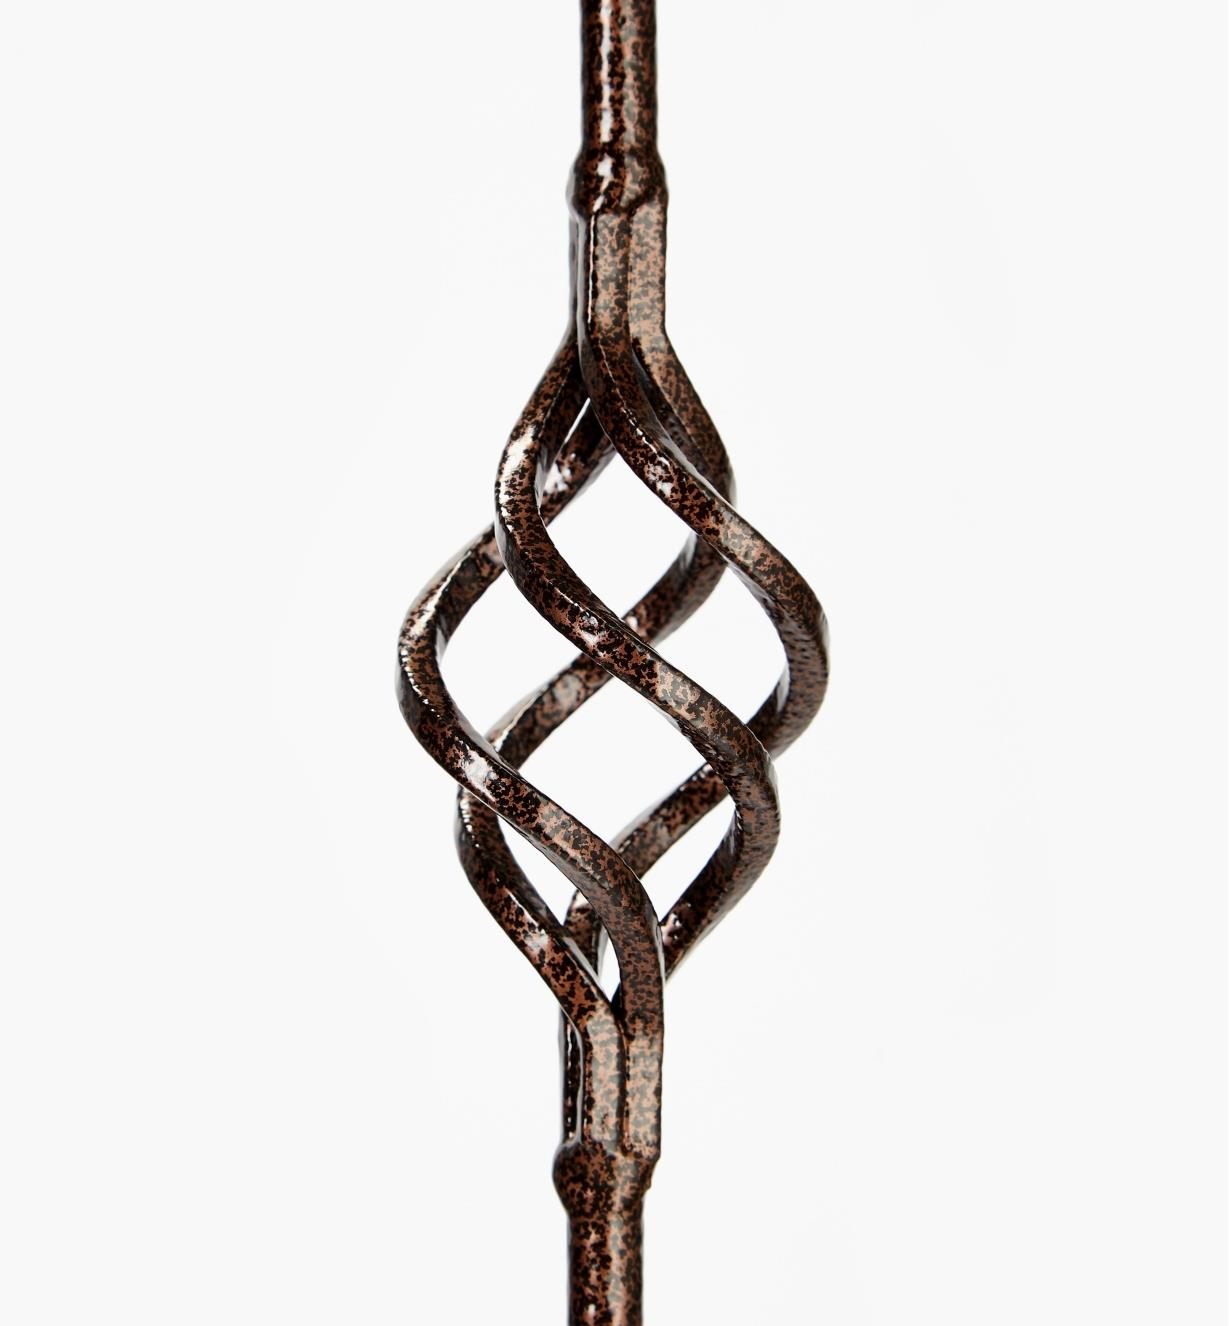 Closer view of decorative twist on the Camelot garden trellis with a hammered copper finish